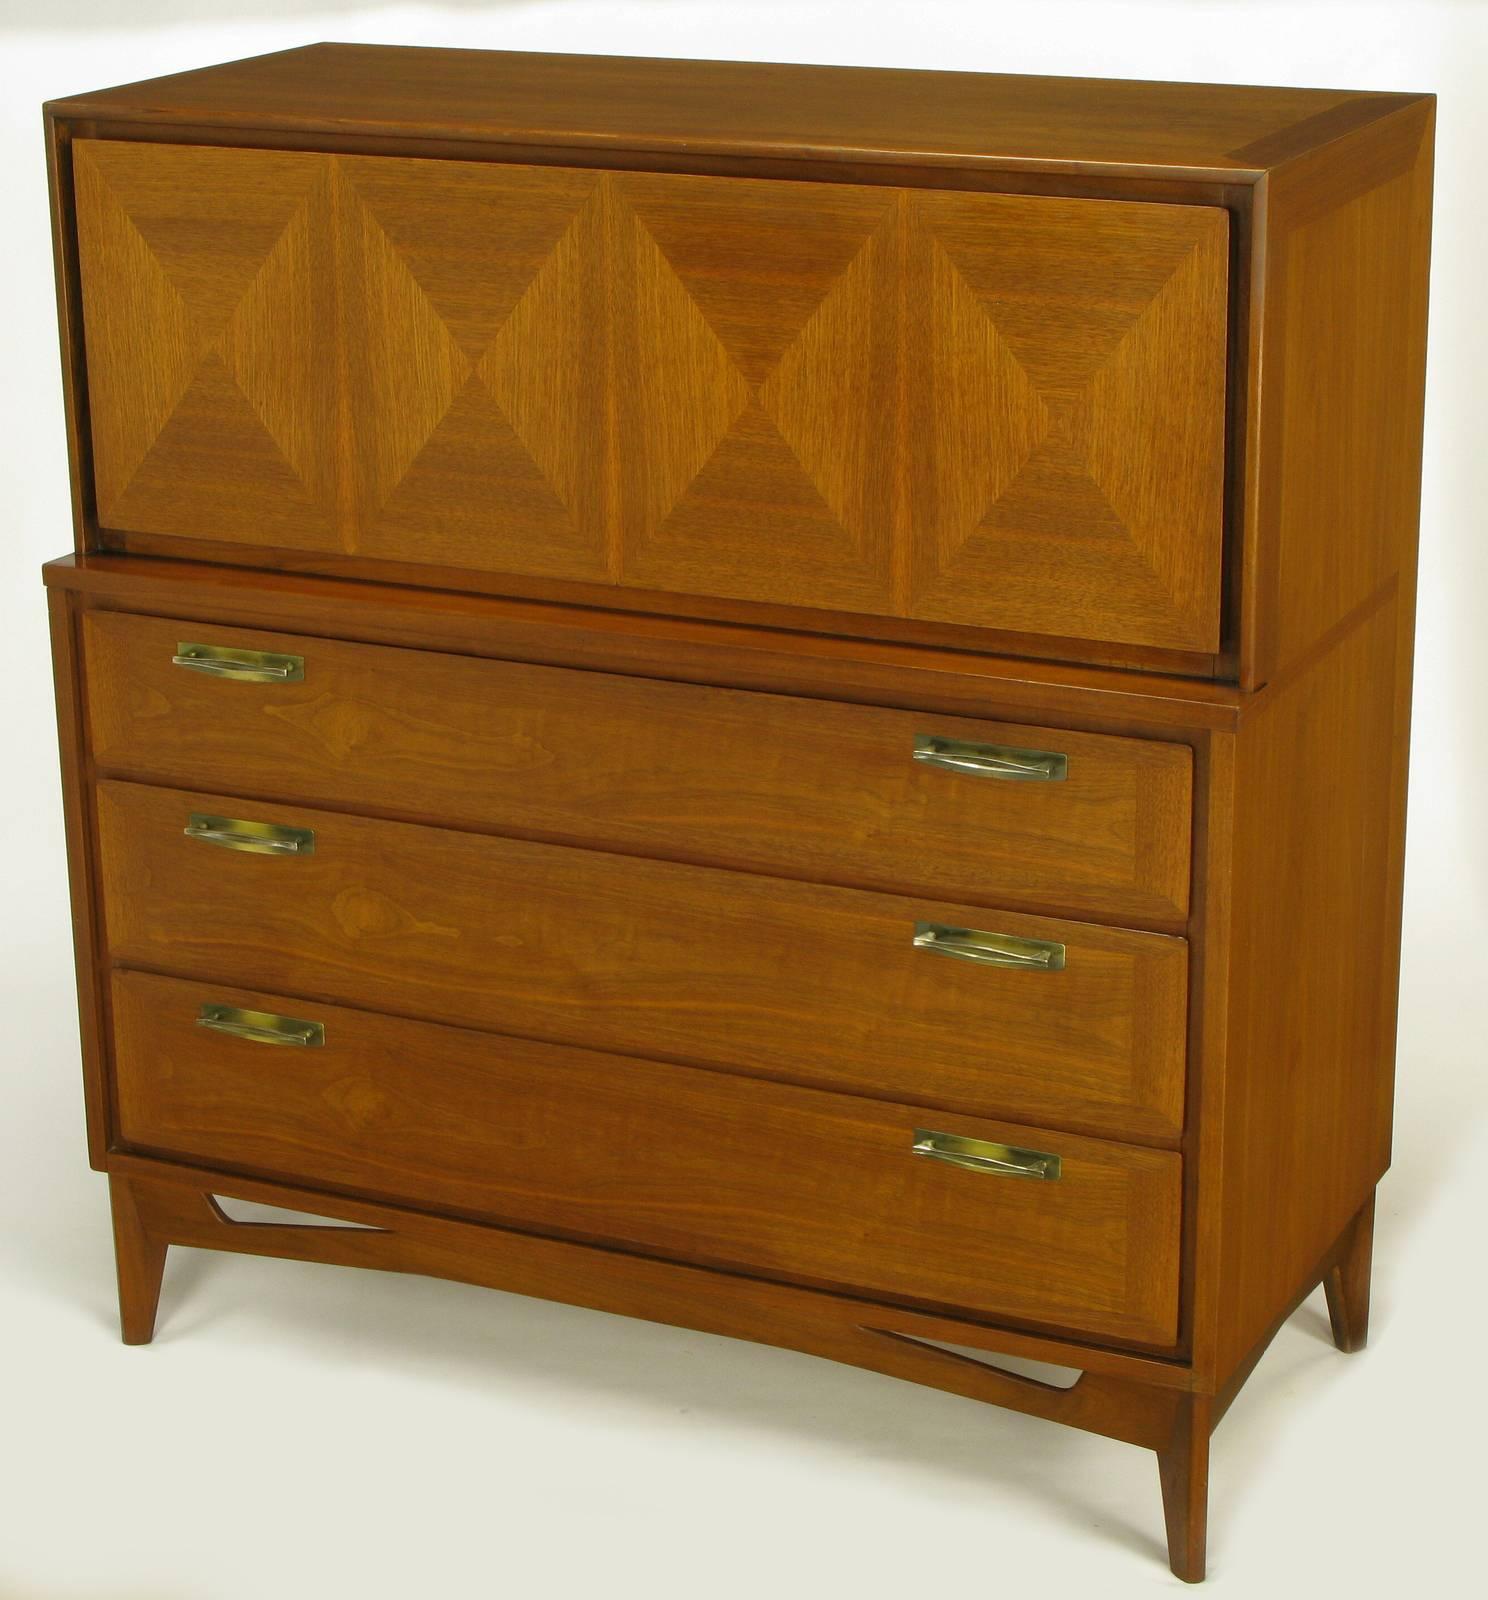 Excellent build quality and design for this circa 1950s modern five-drawer tall dresser. Beautifully wood grained mahogany parquetry front drop down door opens to reveal two siding drawers with sectioned interiors. Three lower drawer have patinated